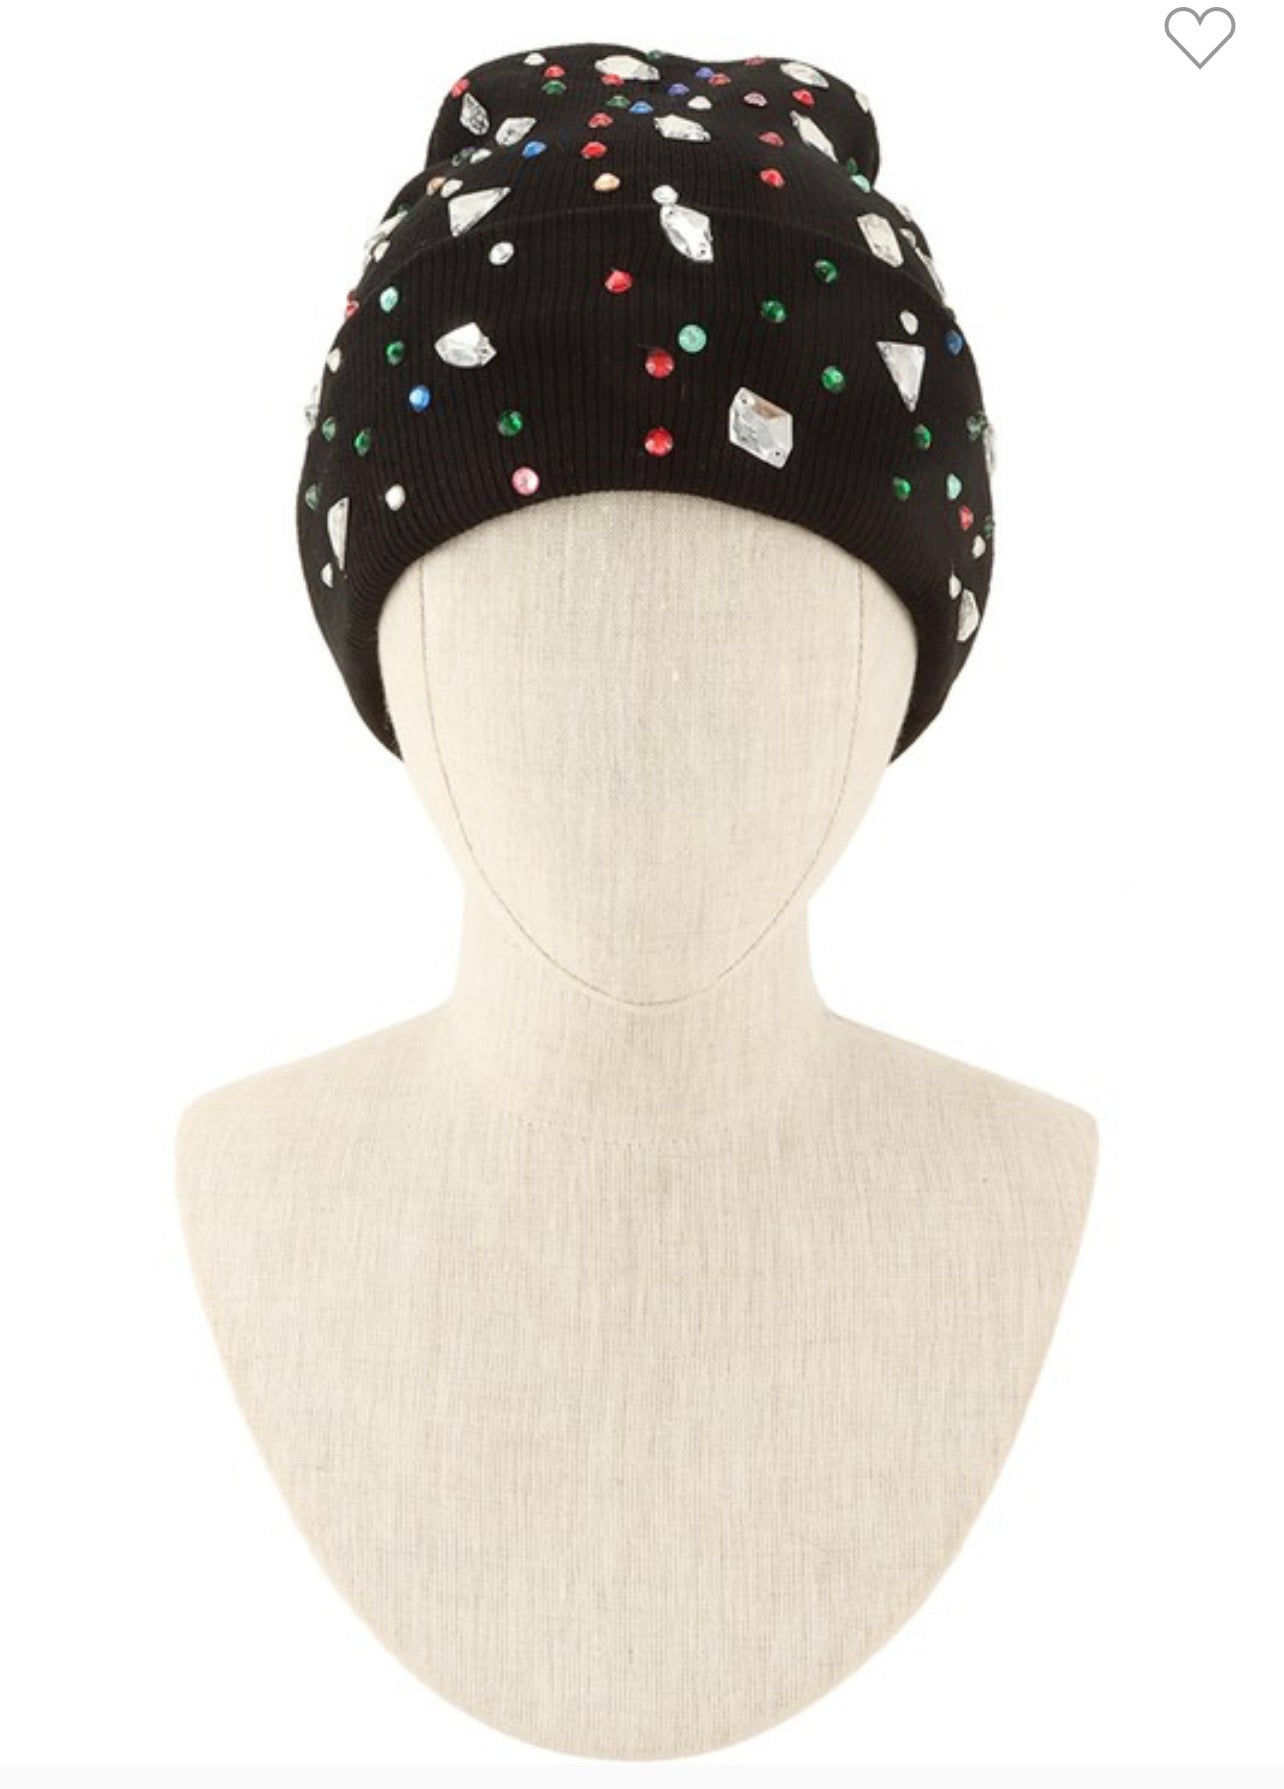 Bedazzled Bling Hat